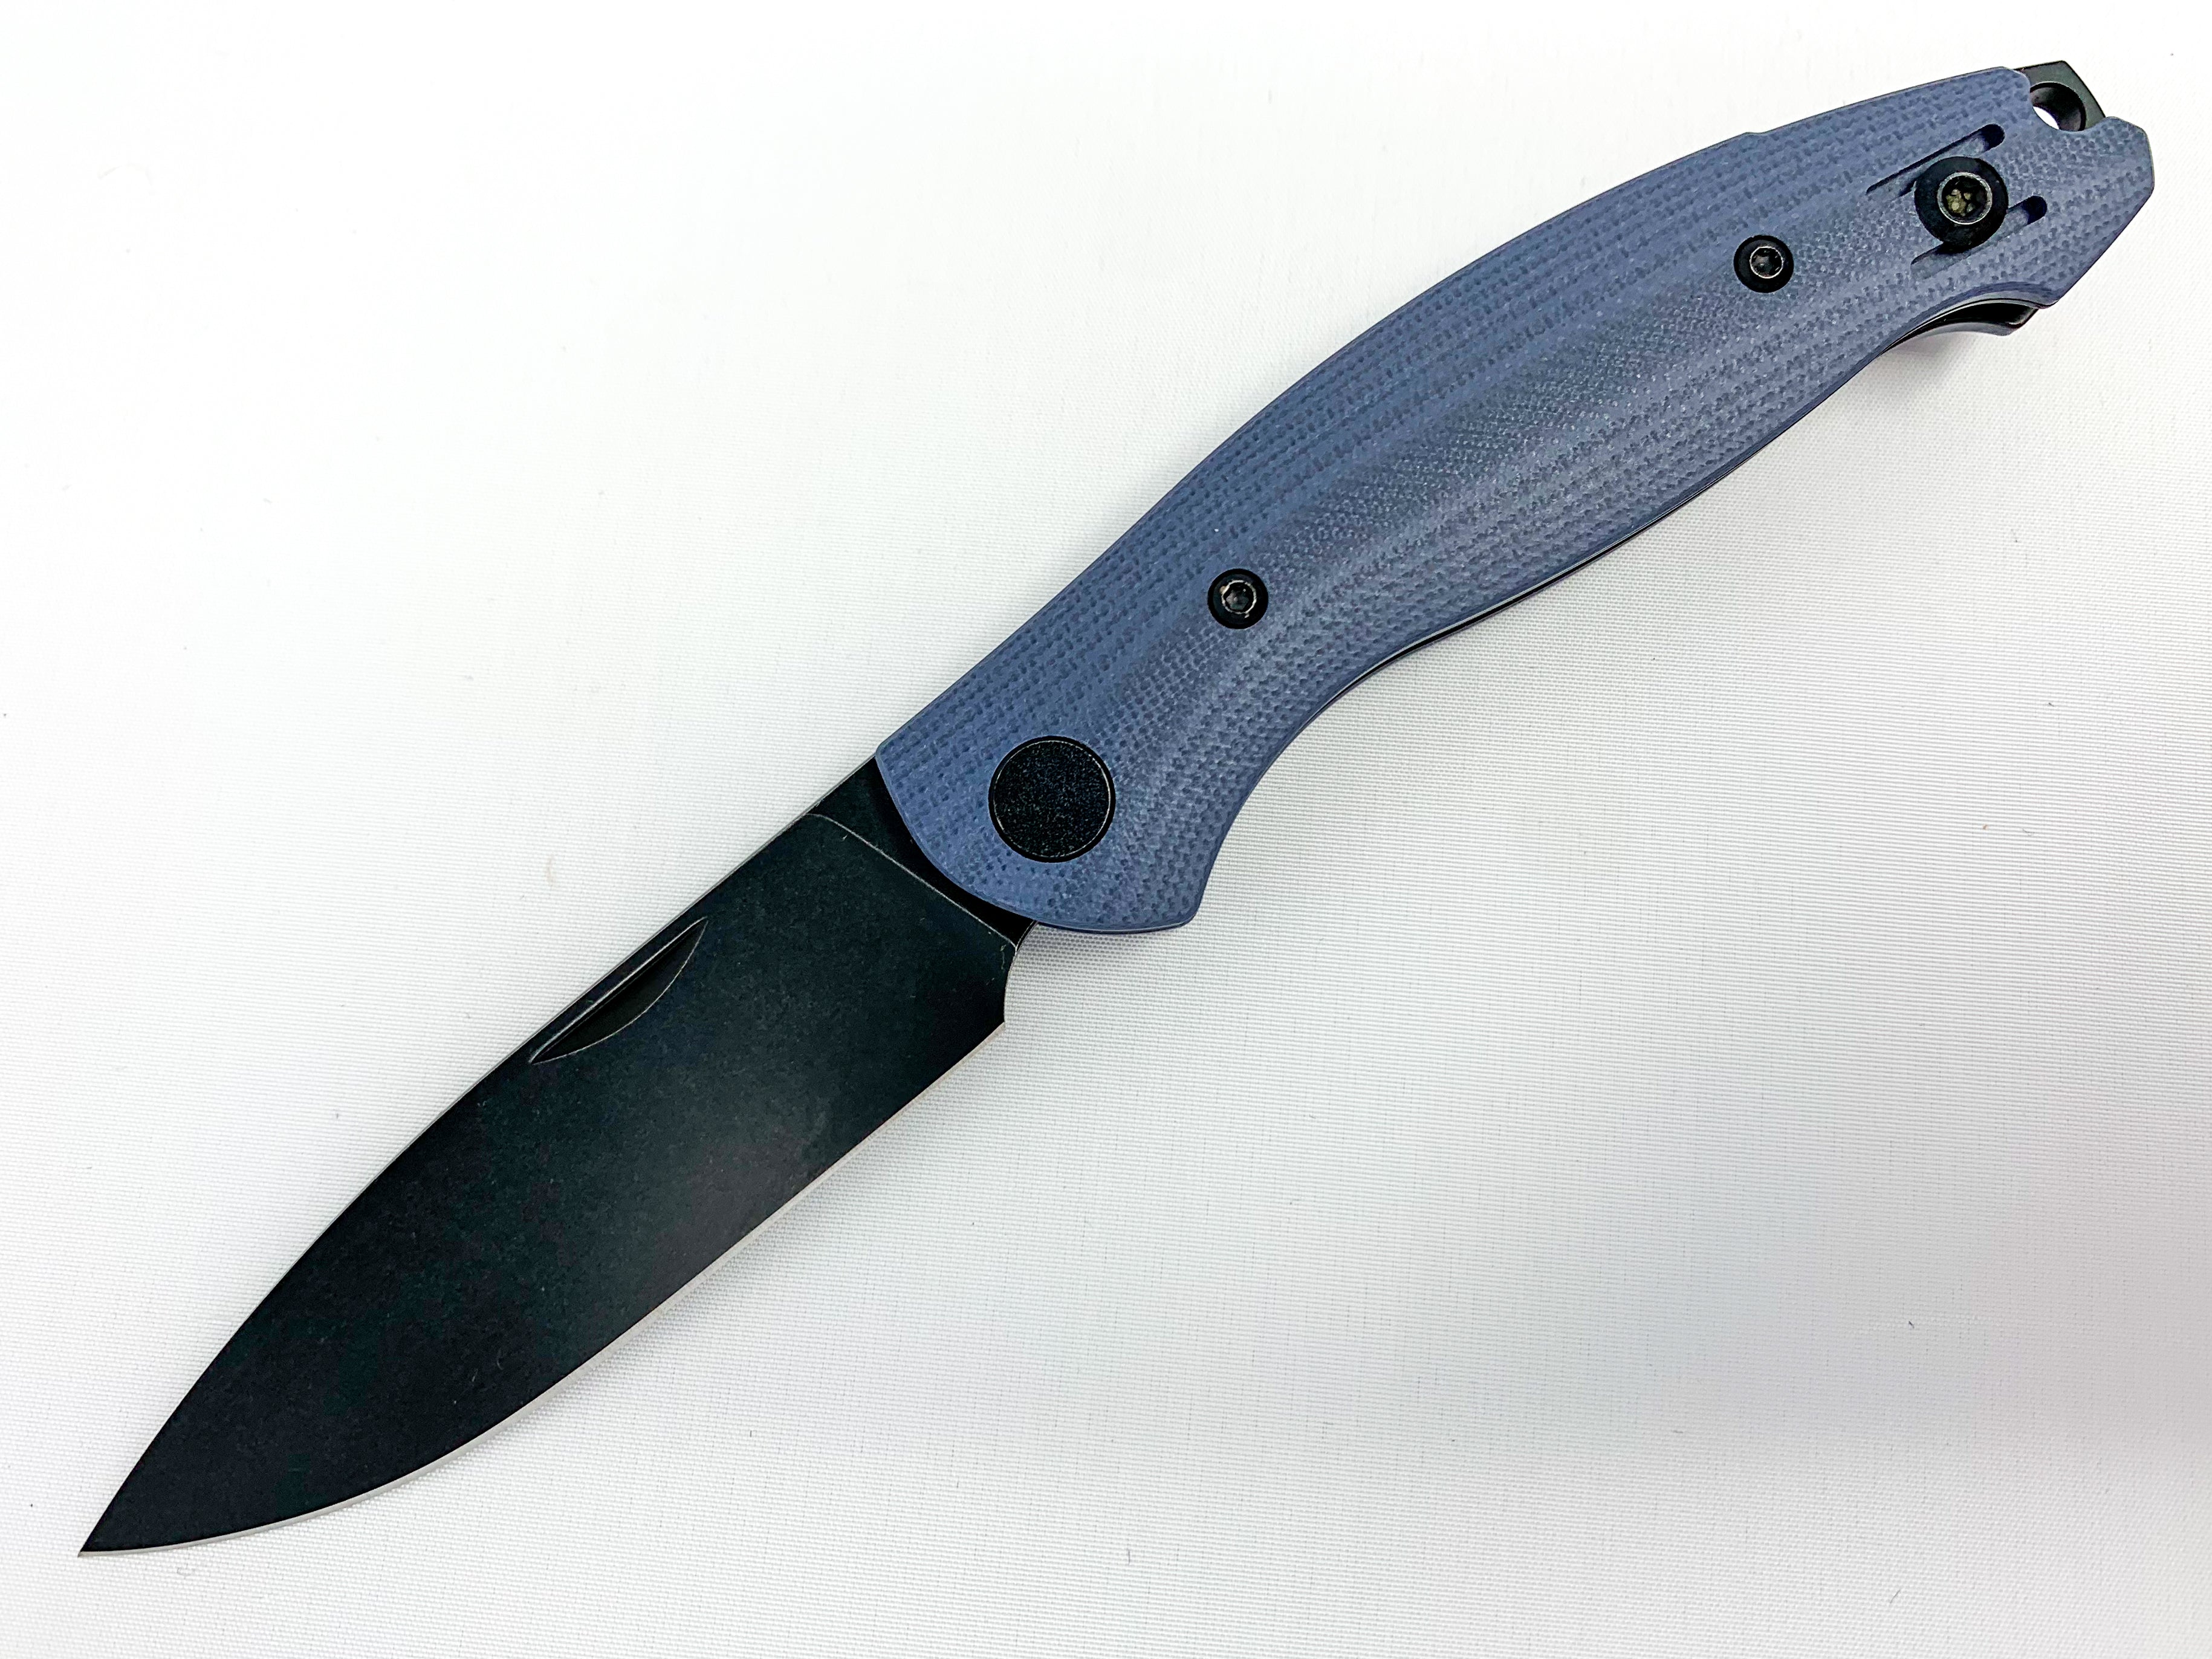 GiantMouse ACE Farley - Slip Joint - Blue G10 - PVD Blade